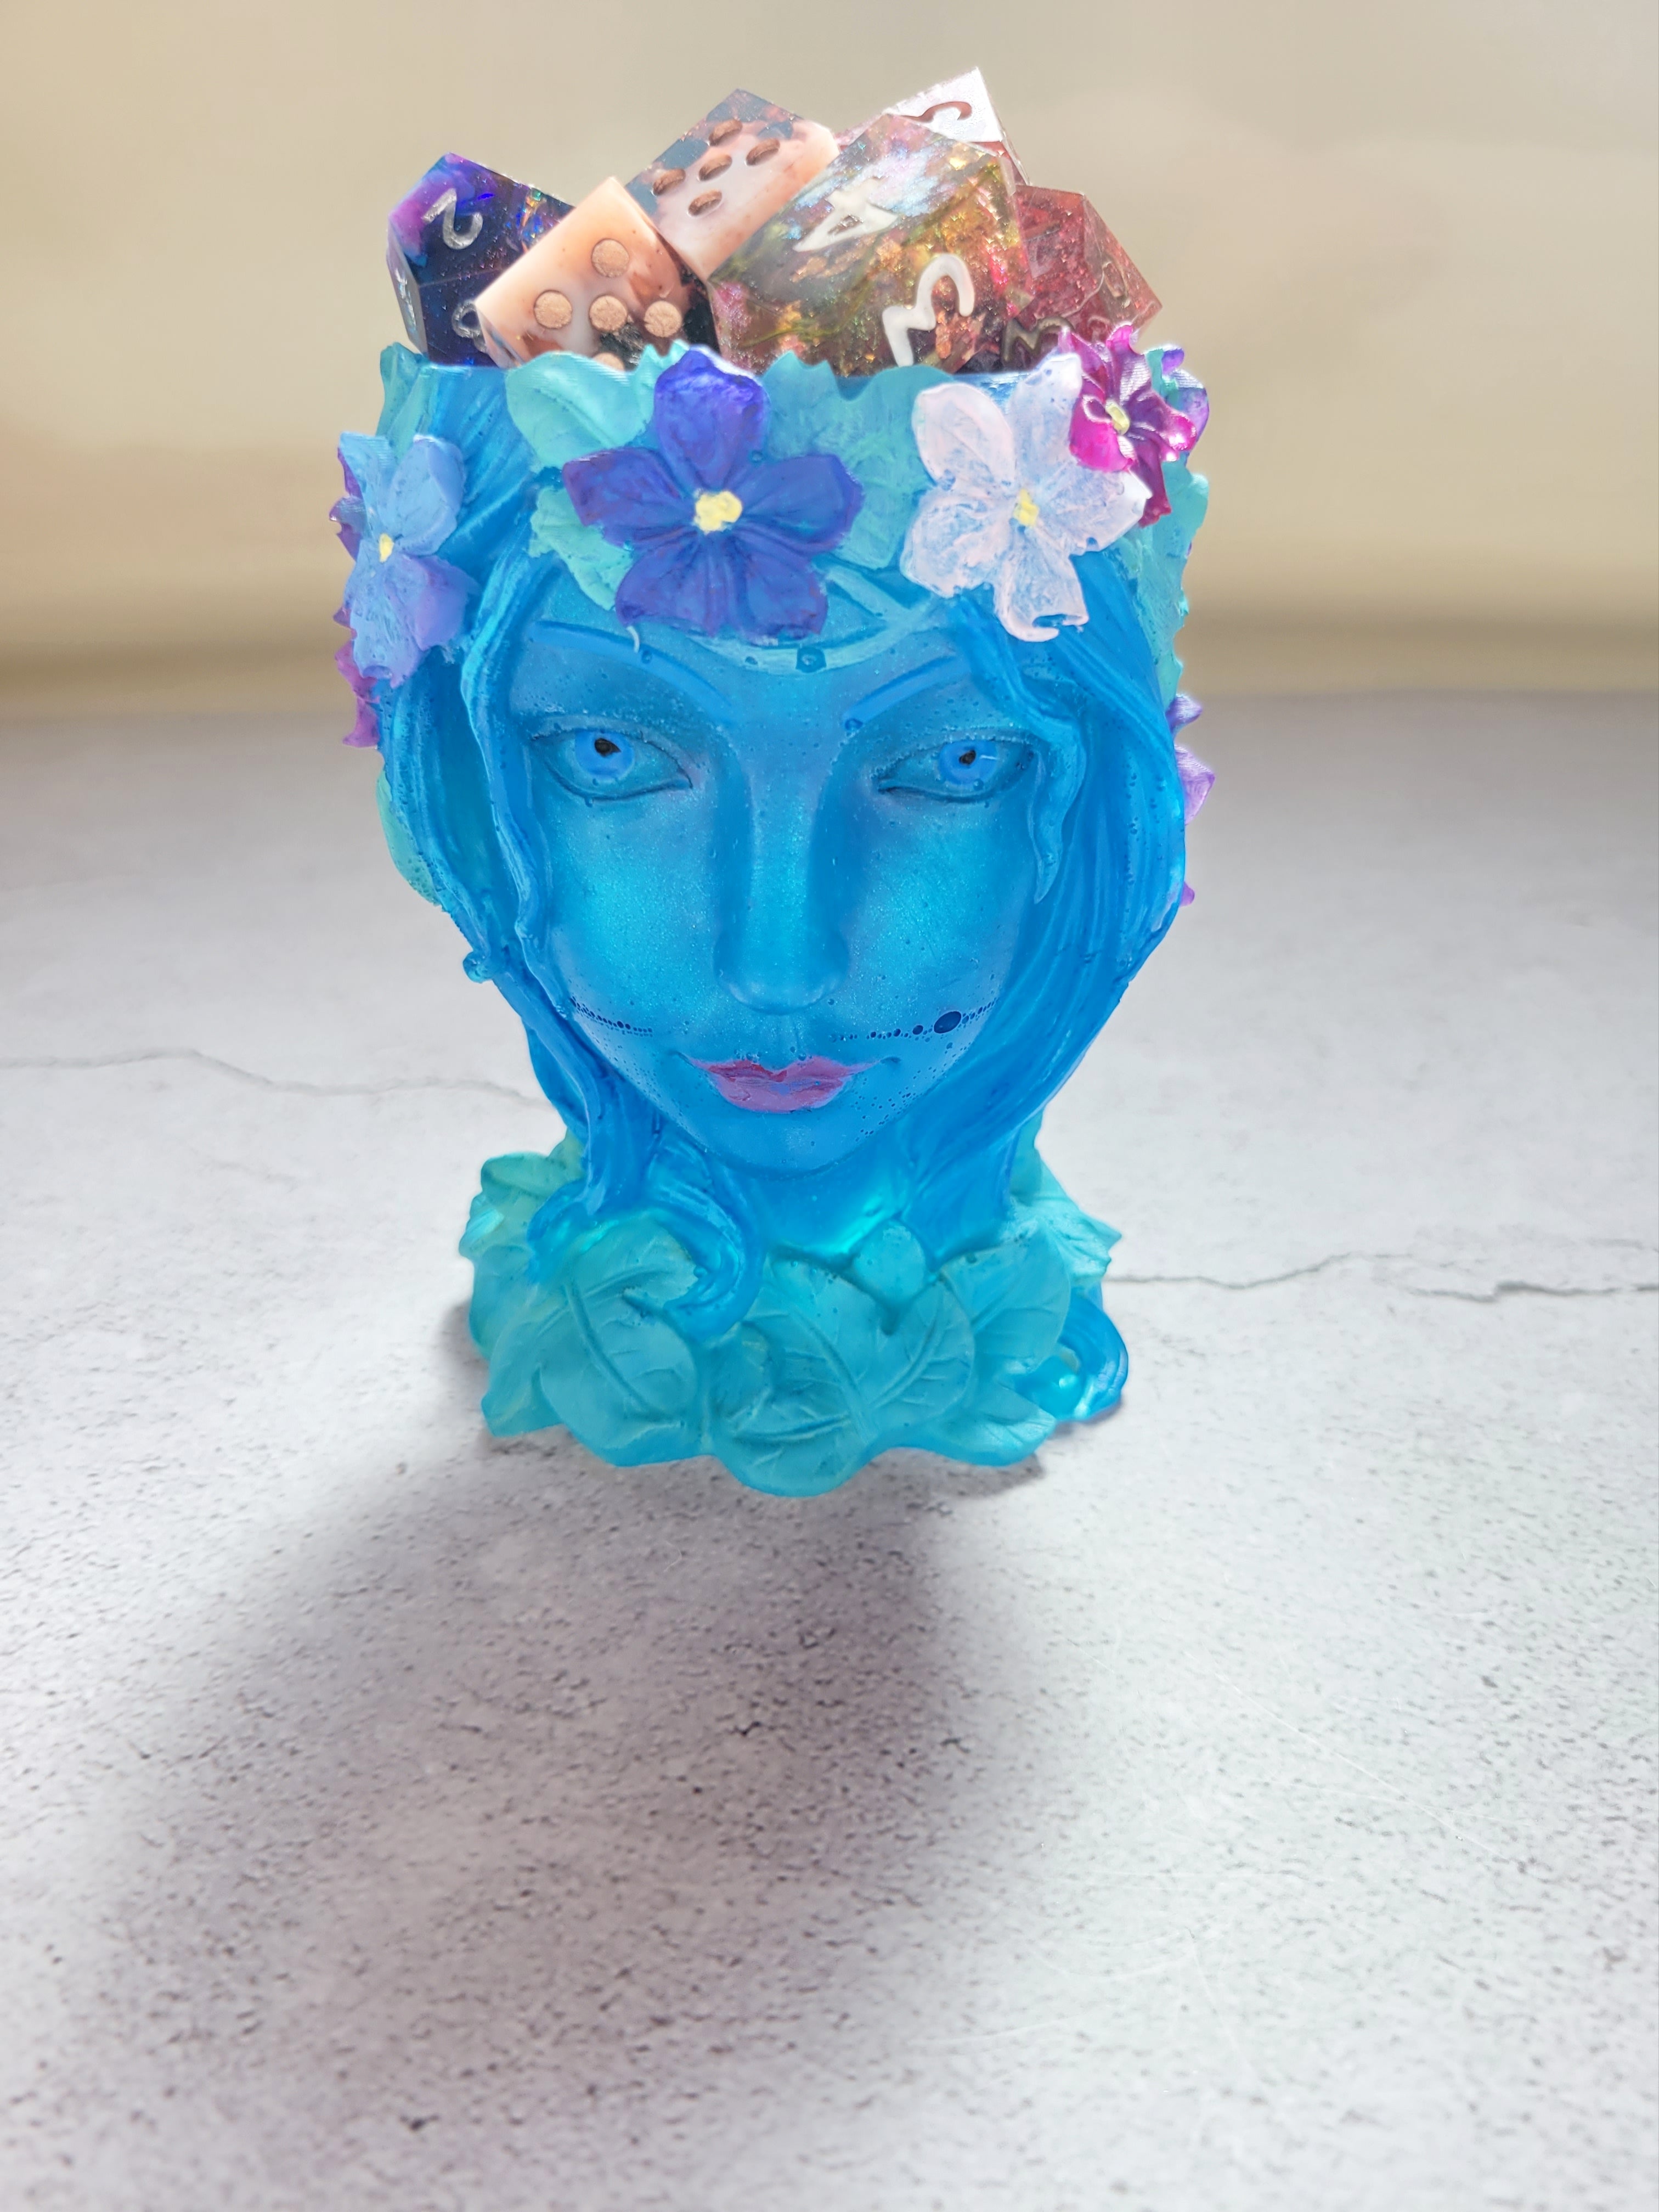 a resin made female ancient statue bust, blue in color with painted leaves and flowers. front view with dice in the holder